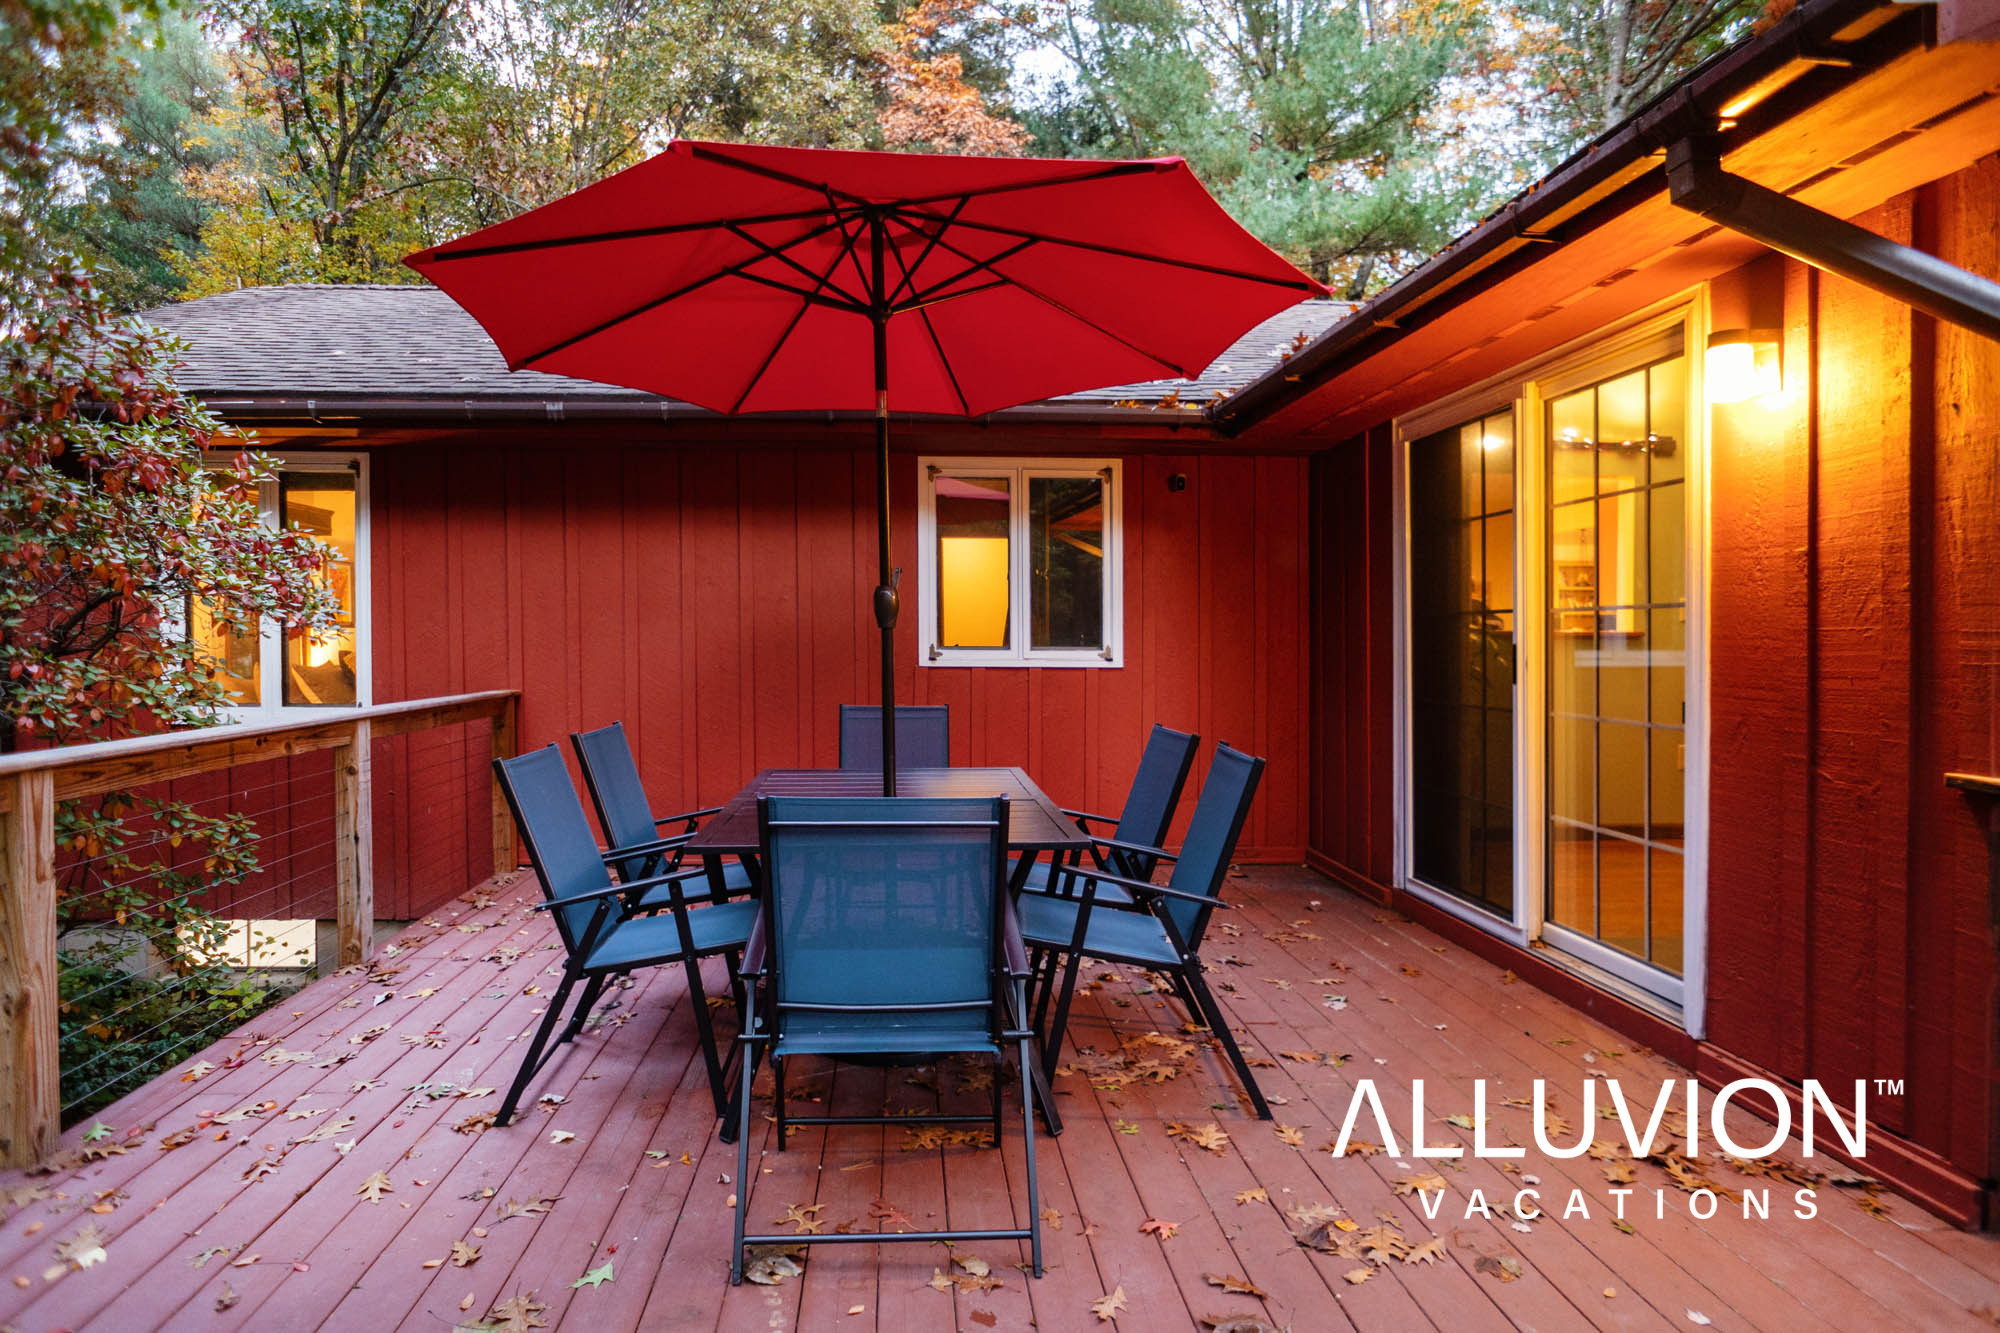 Find serenity at Alluvion Vacations’ Private Getaway Airbnb Cabin near Hudson, NY – Best Airbnb Cabins in New York